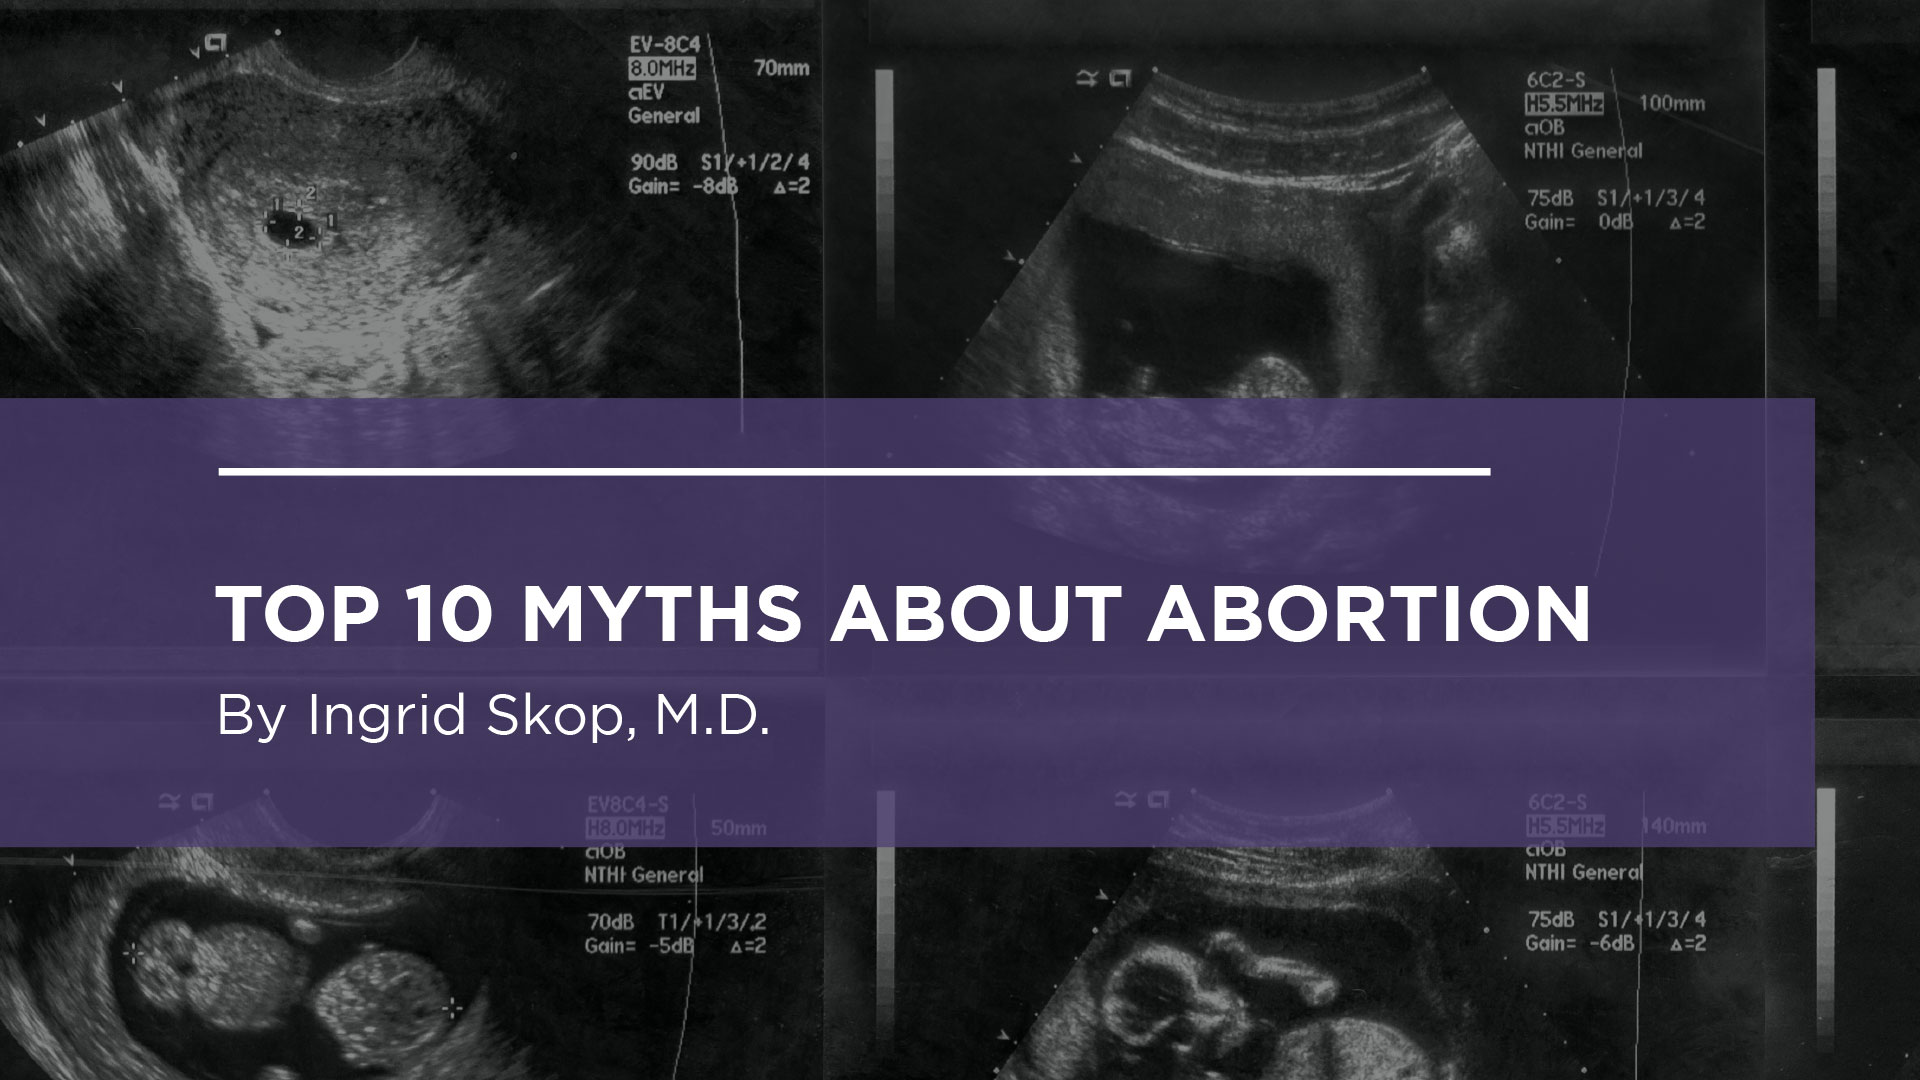 Top 10 Myths About Abortion